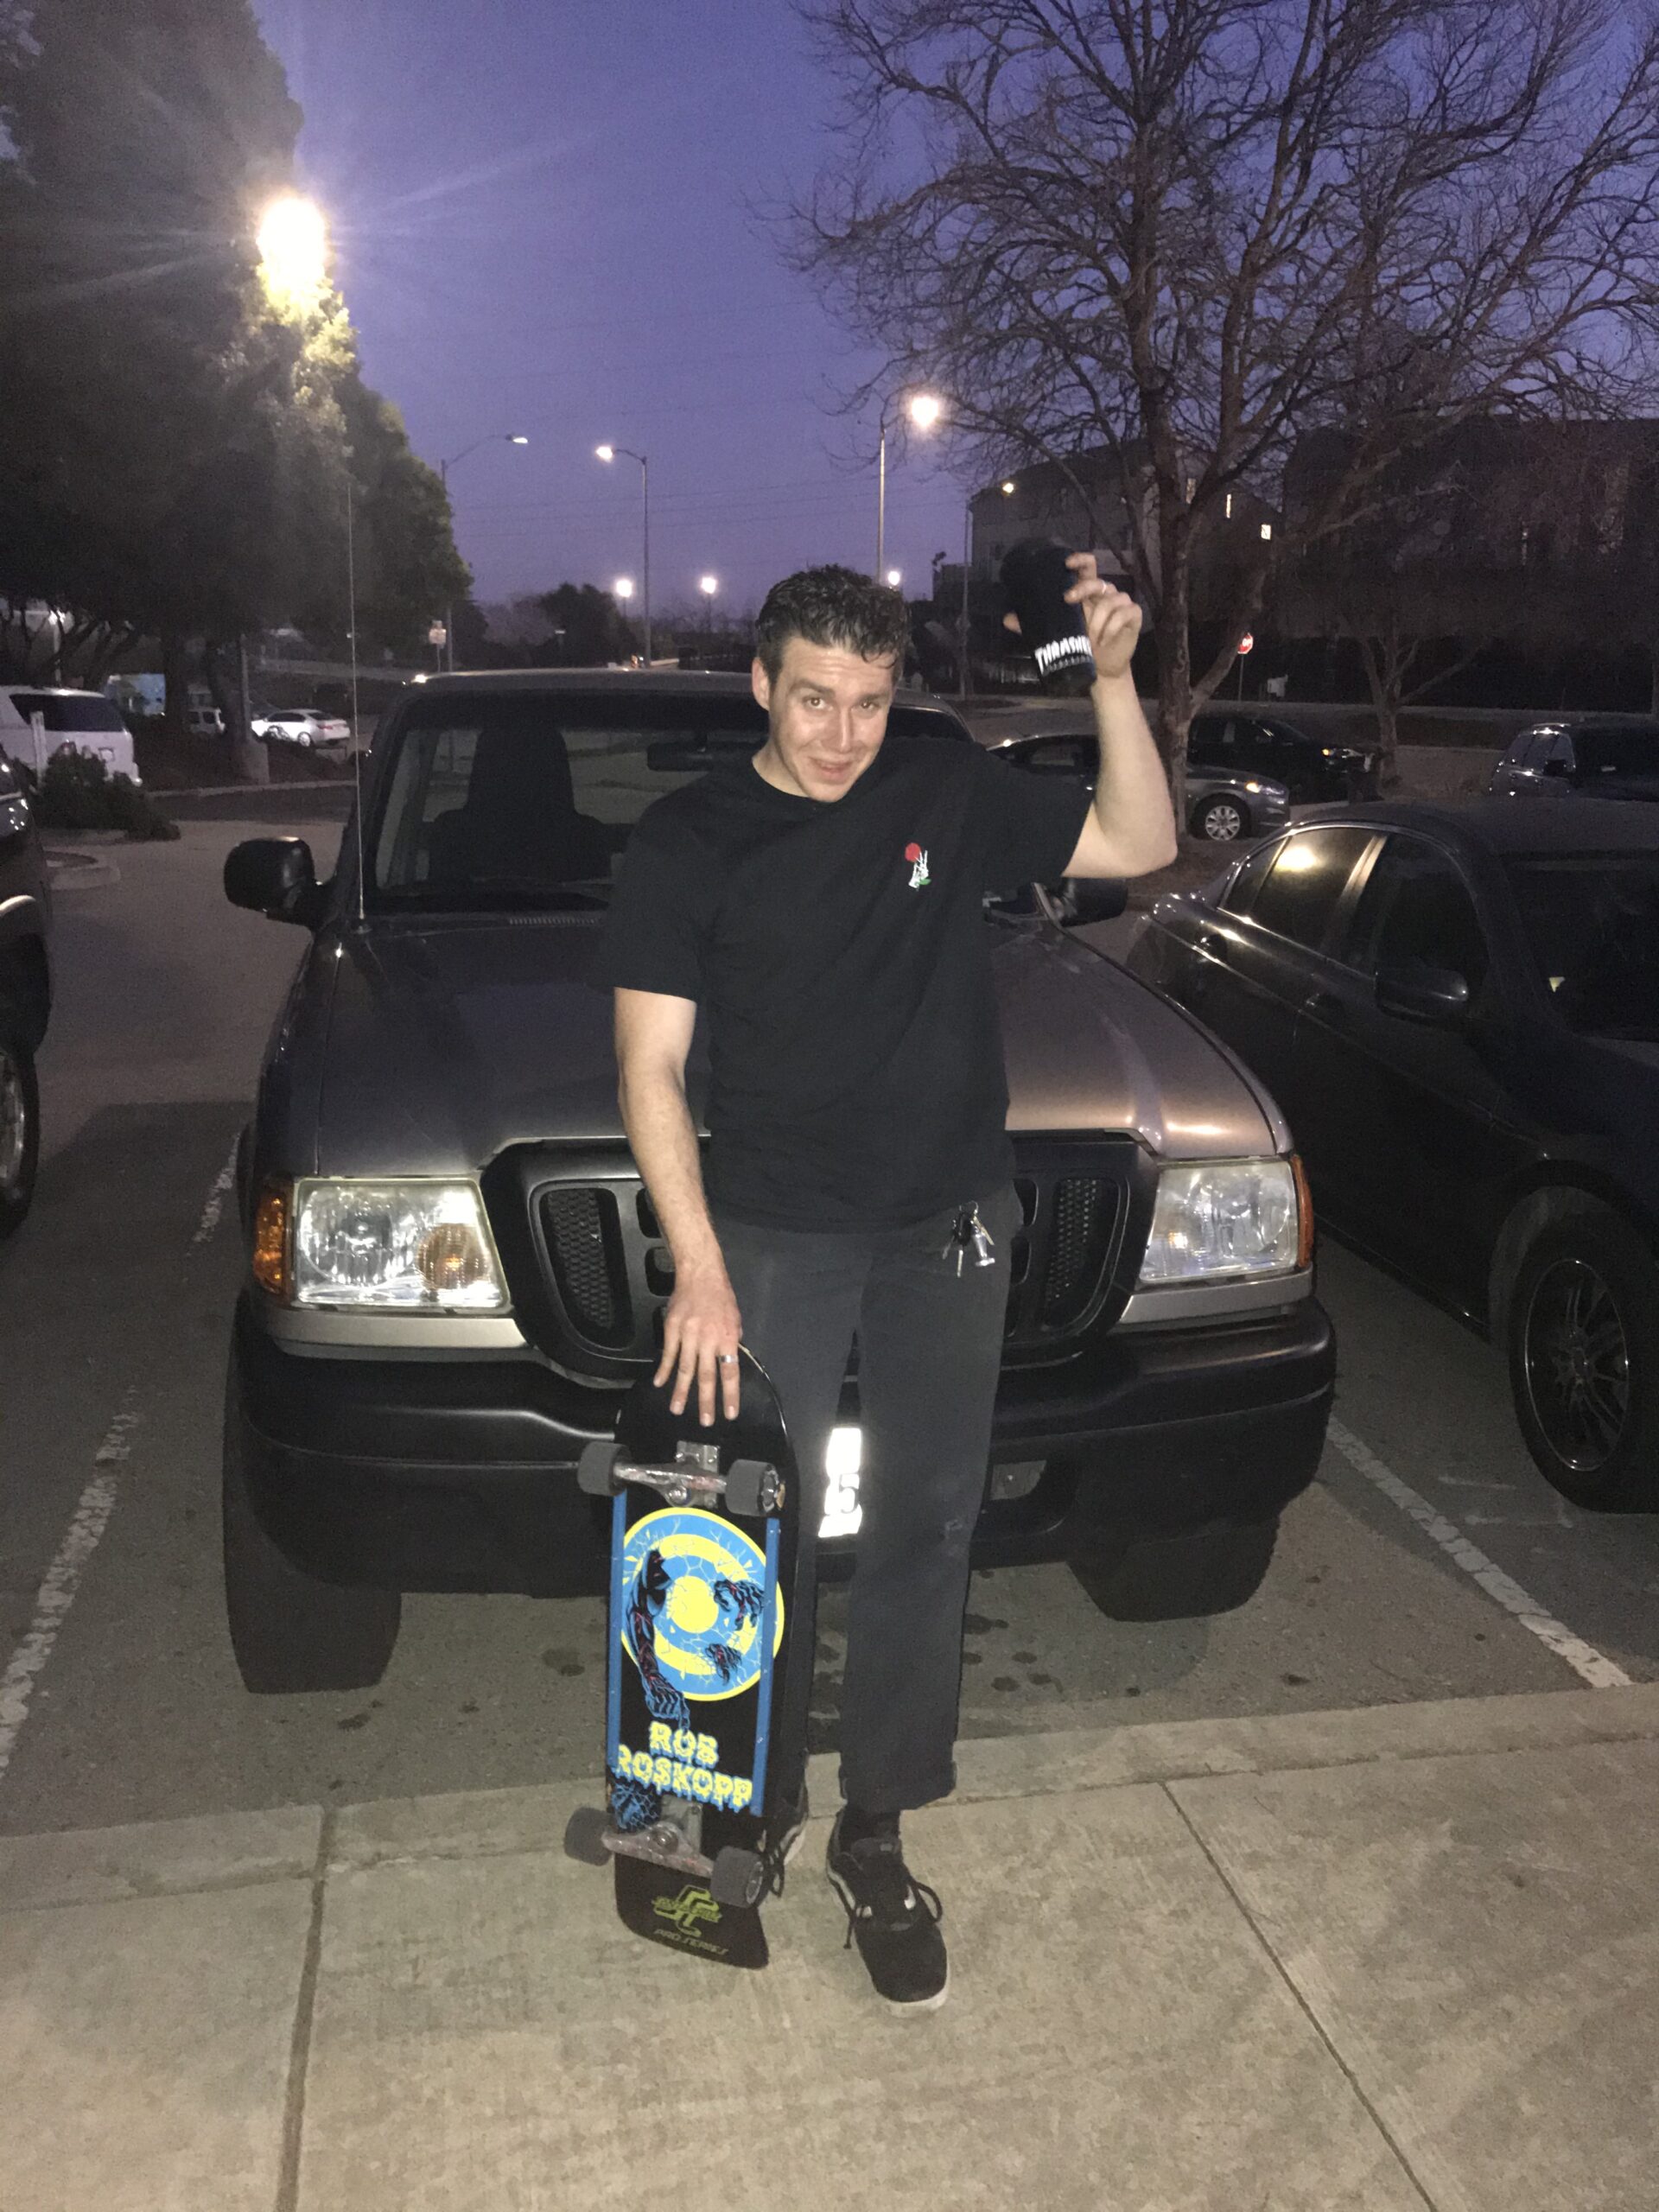 CURBOFTHEDAY Wrap Up: Skating A Curb 366 Days In A    Row